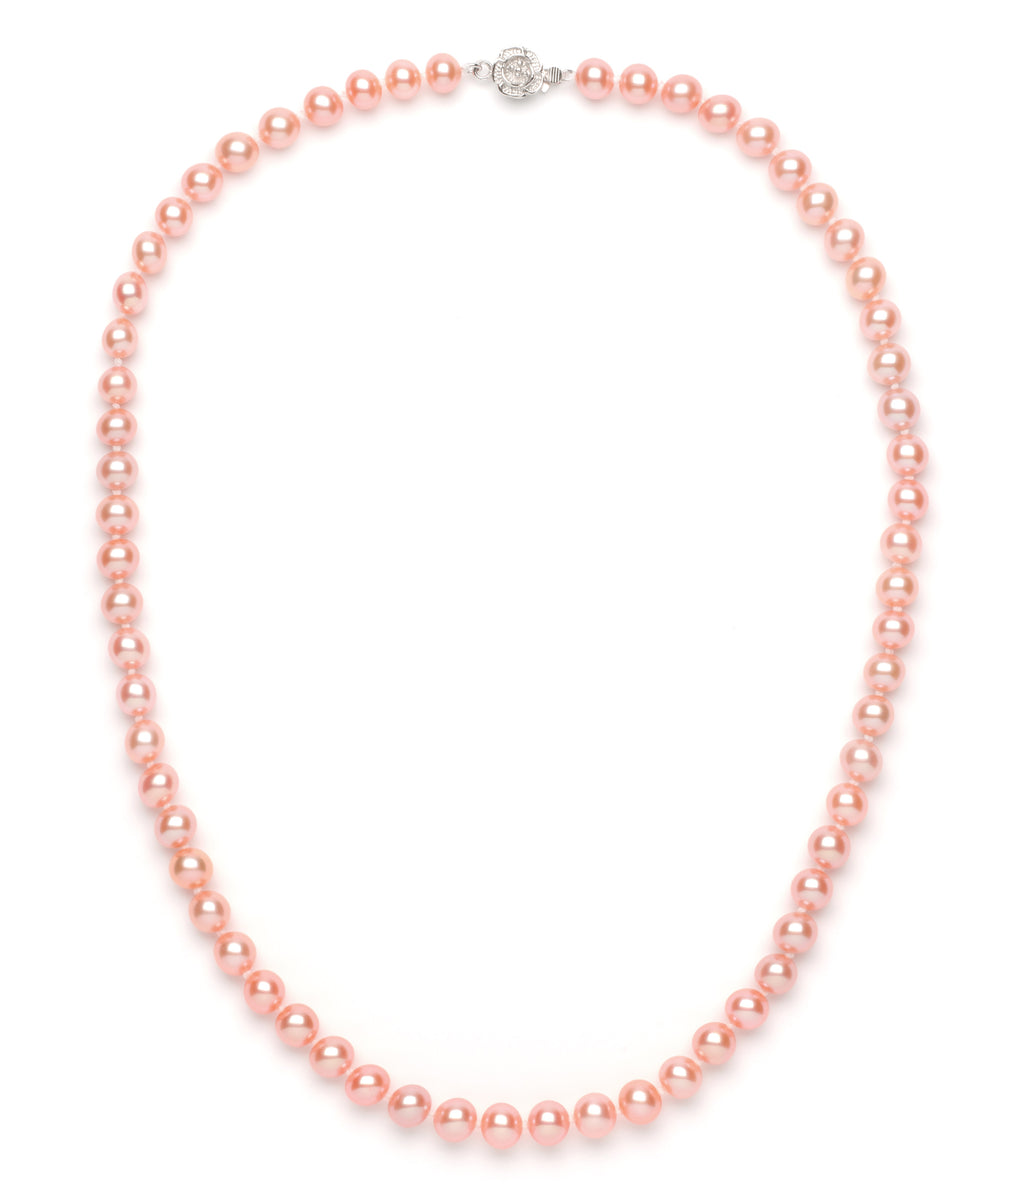 6.0-7.0 mm Pink Freshwater Pearl Necklace